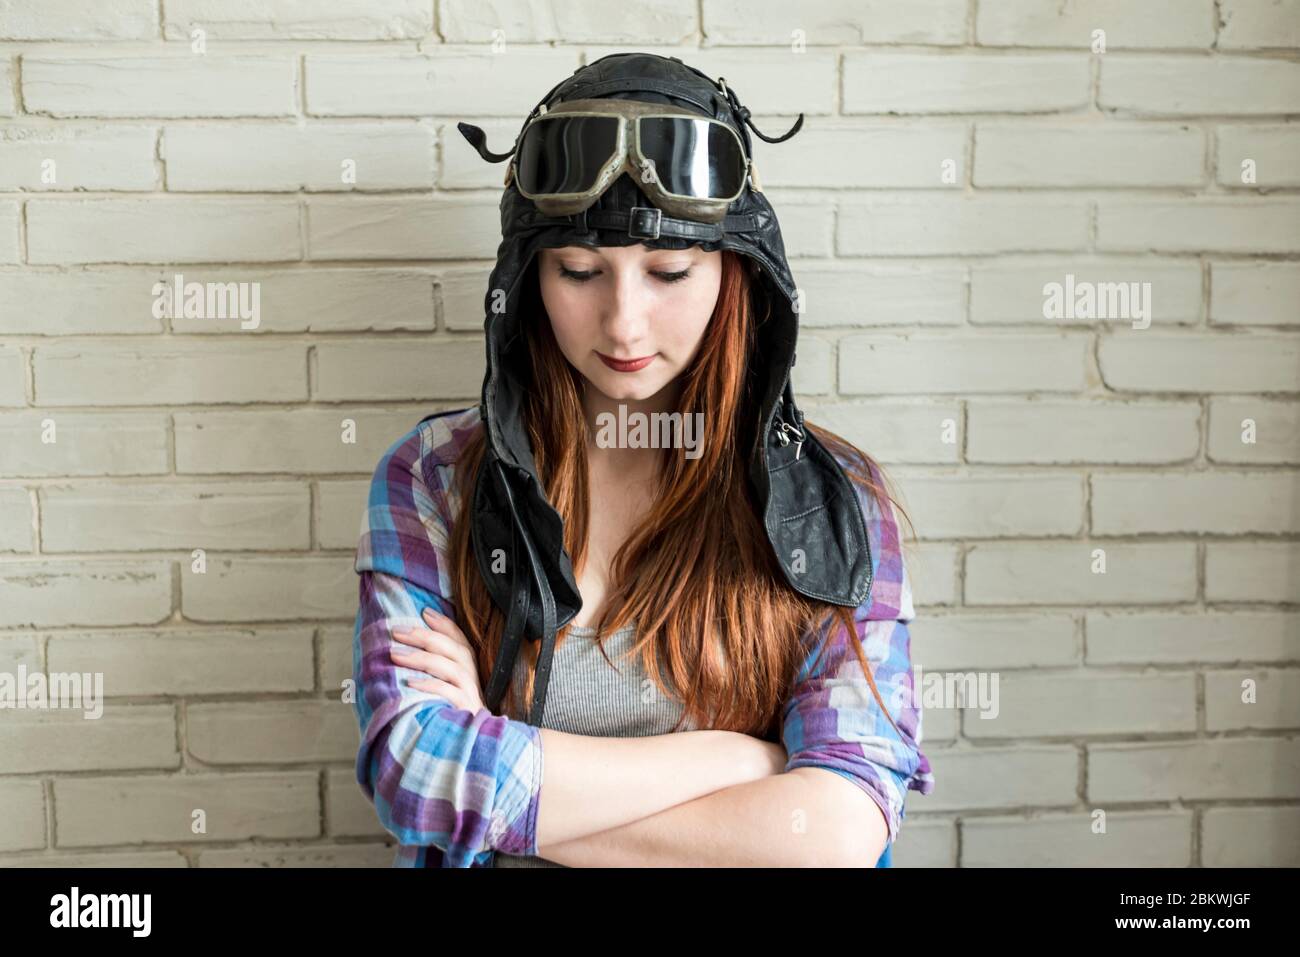 Portrait of a red-haired girl in a pilot's cap and glasses on a brick wall background Stock Photo